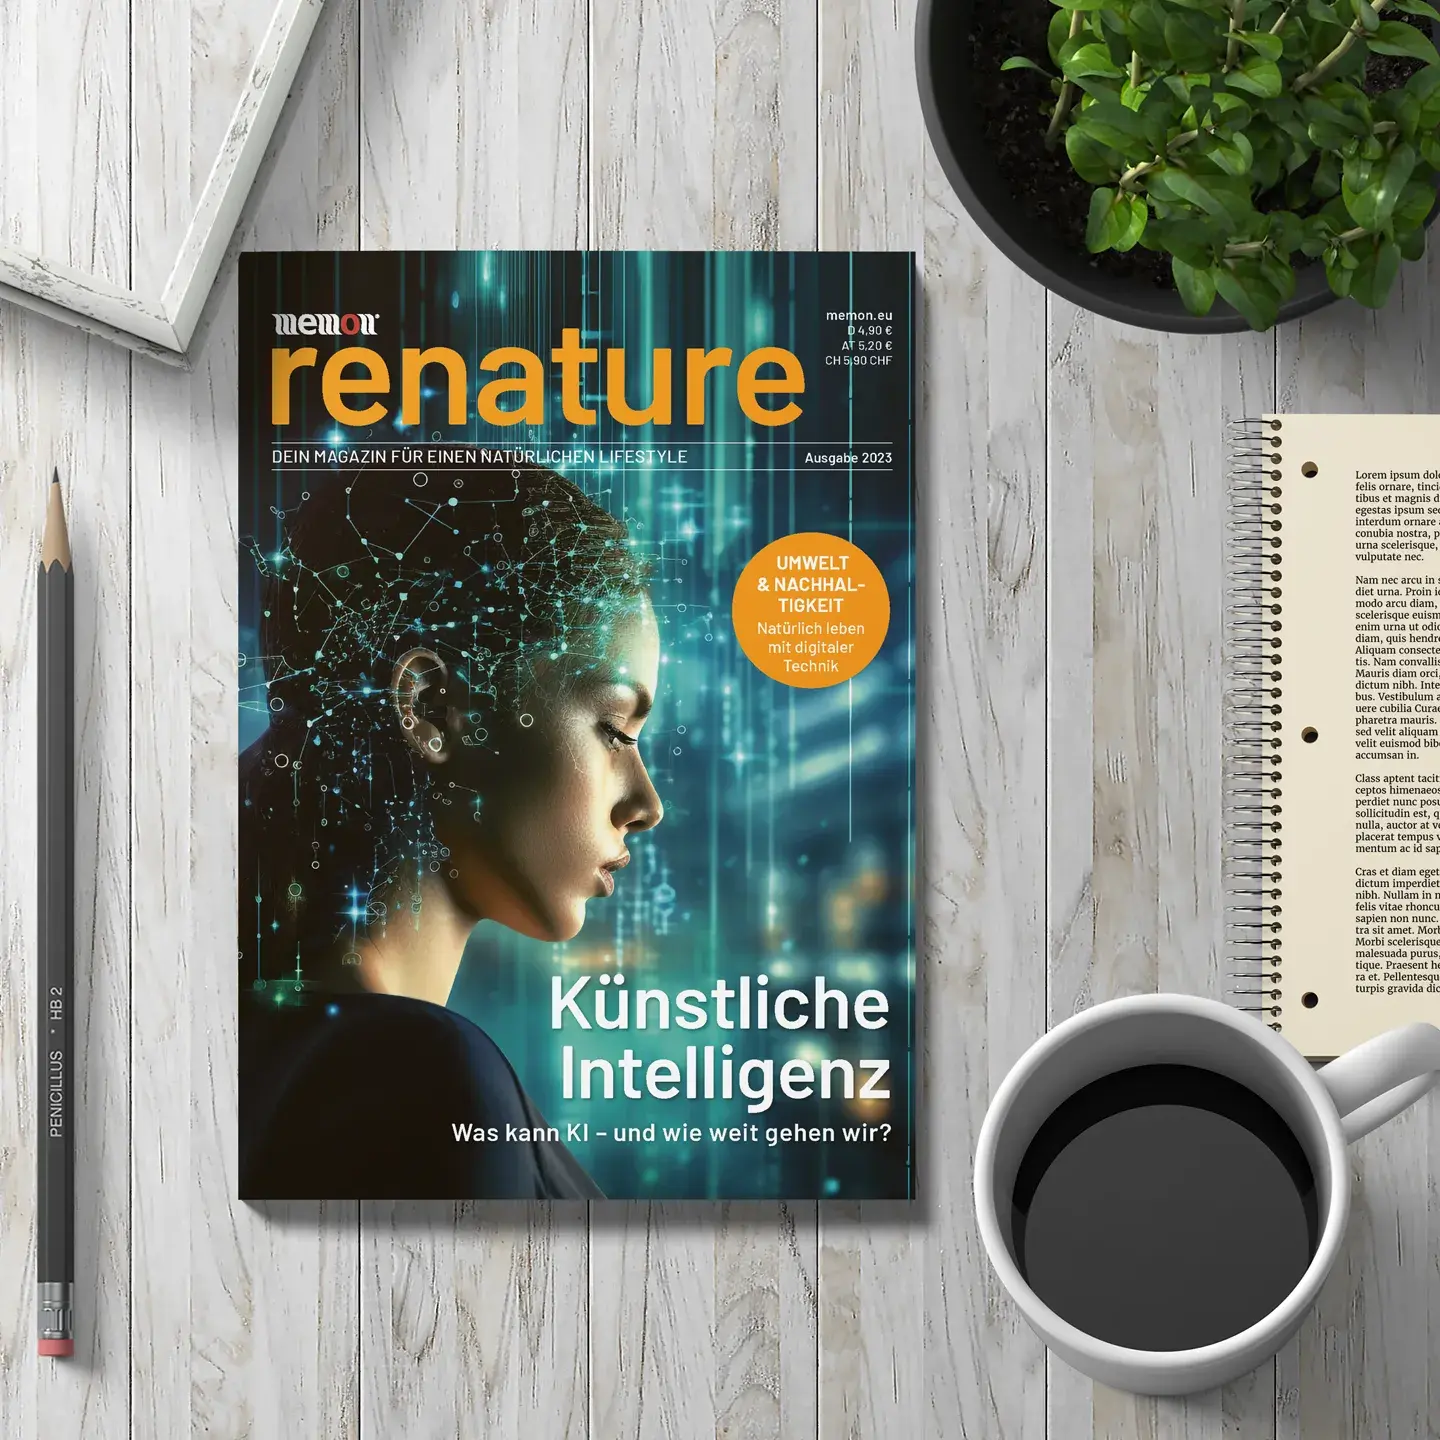 The new memon magazine "renature" lies on a table next to a notepad and a coffee